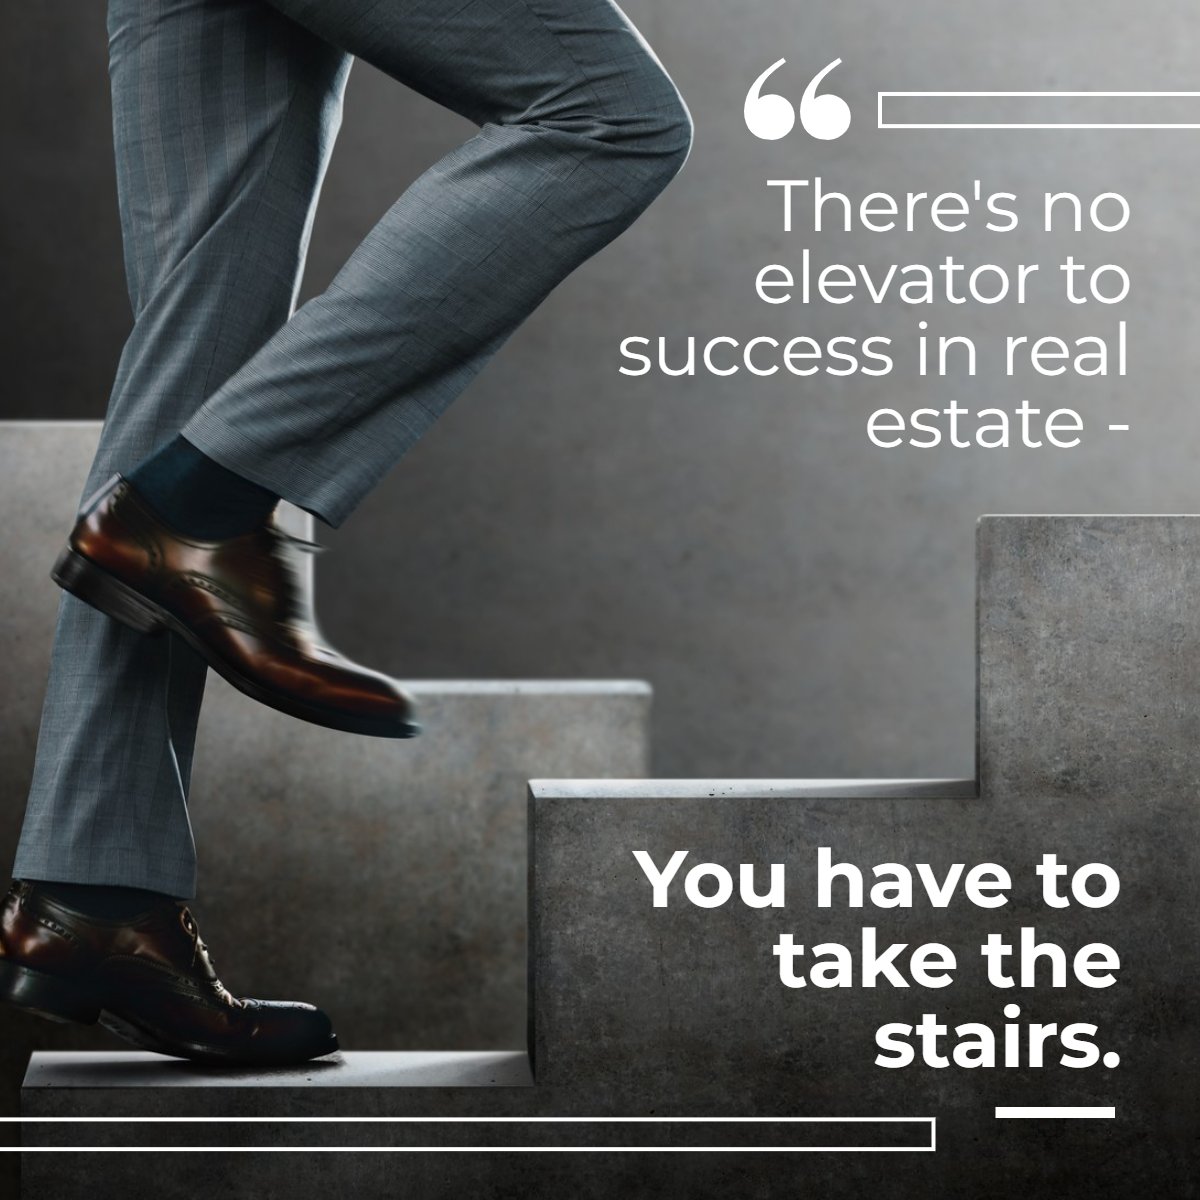 Every level of success opens up new opportunities for us to grow and learn.

The view from the top justifies every step taken to get there!

#RealEstateQuote #RealEstateQuotes #RealEstateLife